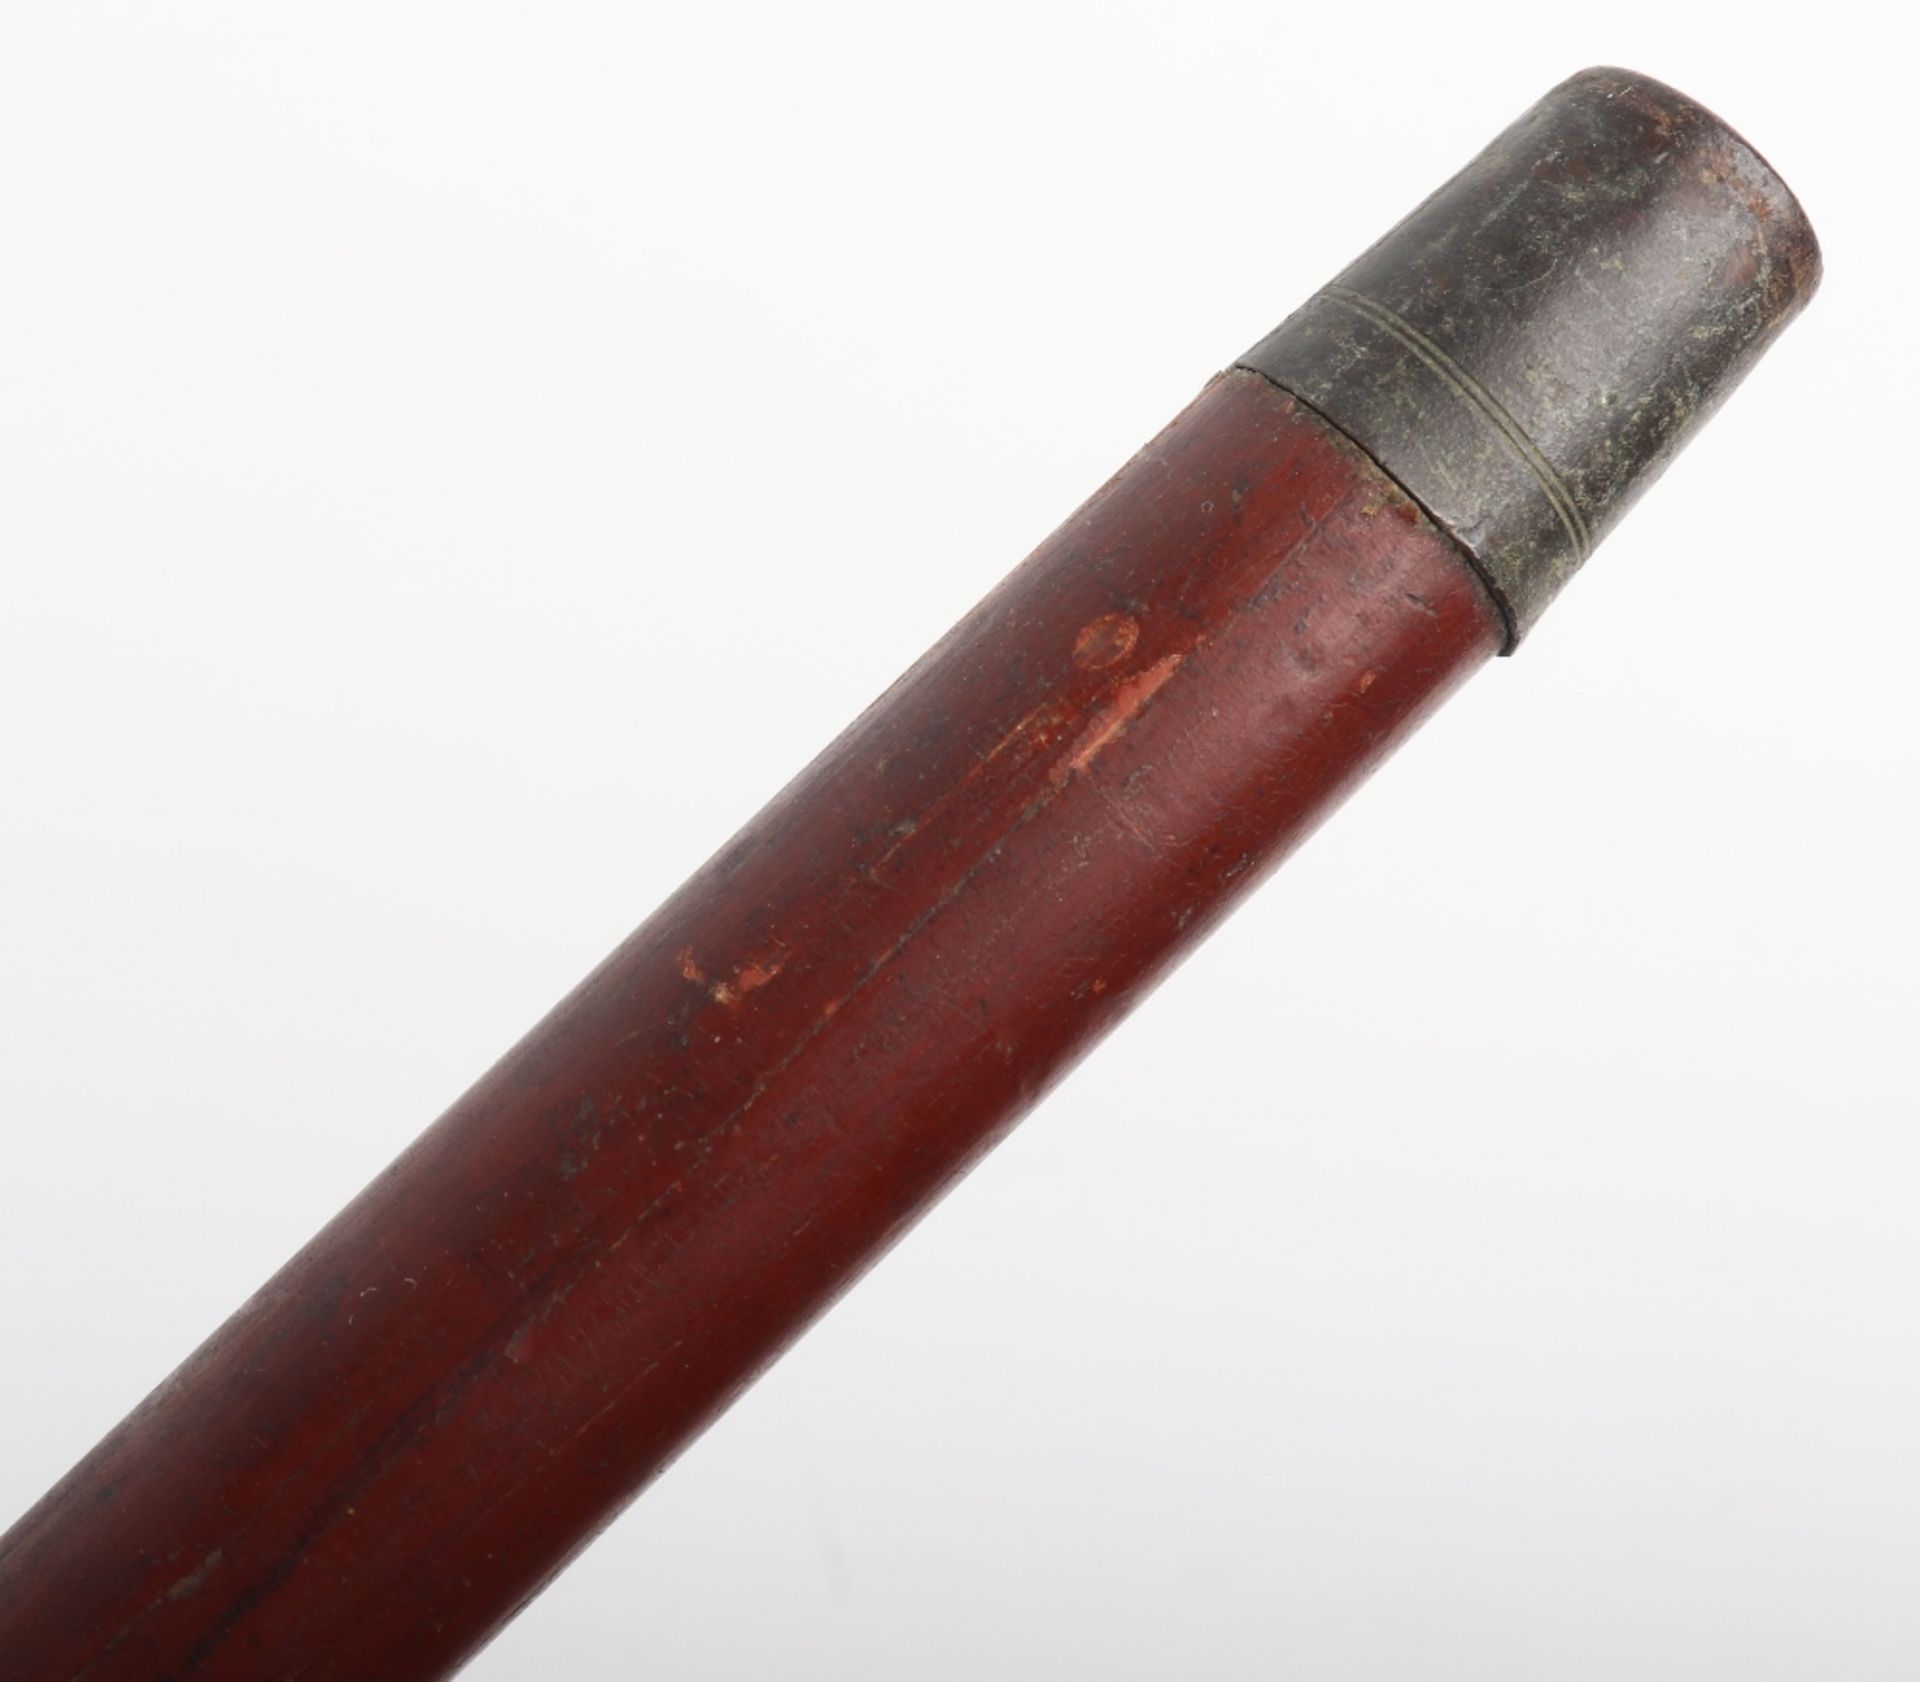 An Edwardian walking stick with spirit level (lacking liquid) and scaled ruler, with horn handle - Image 14 of 14